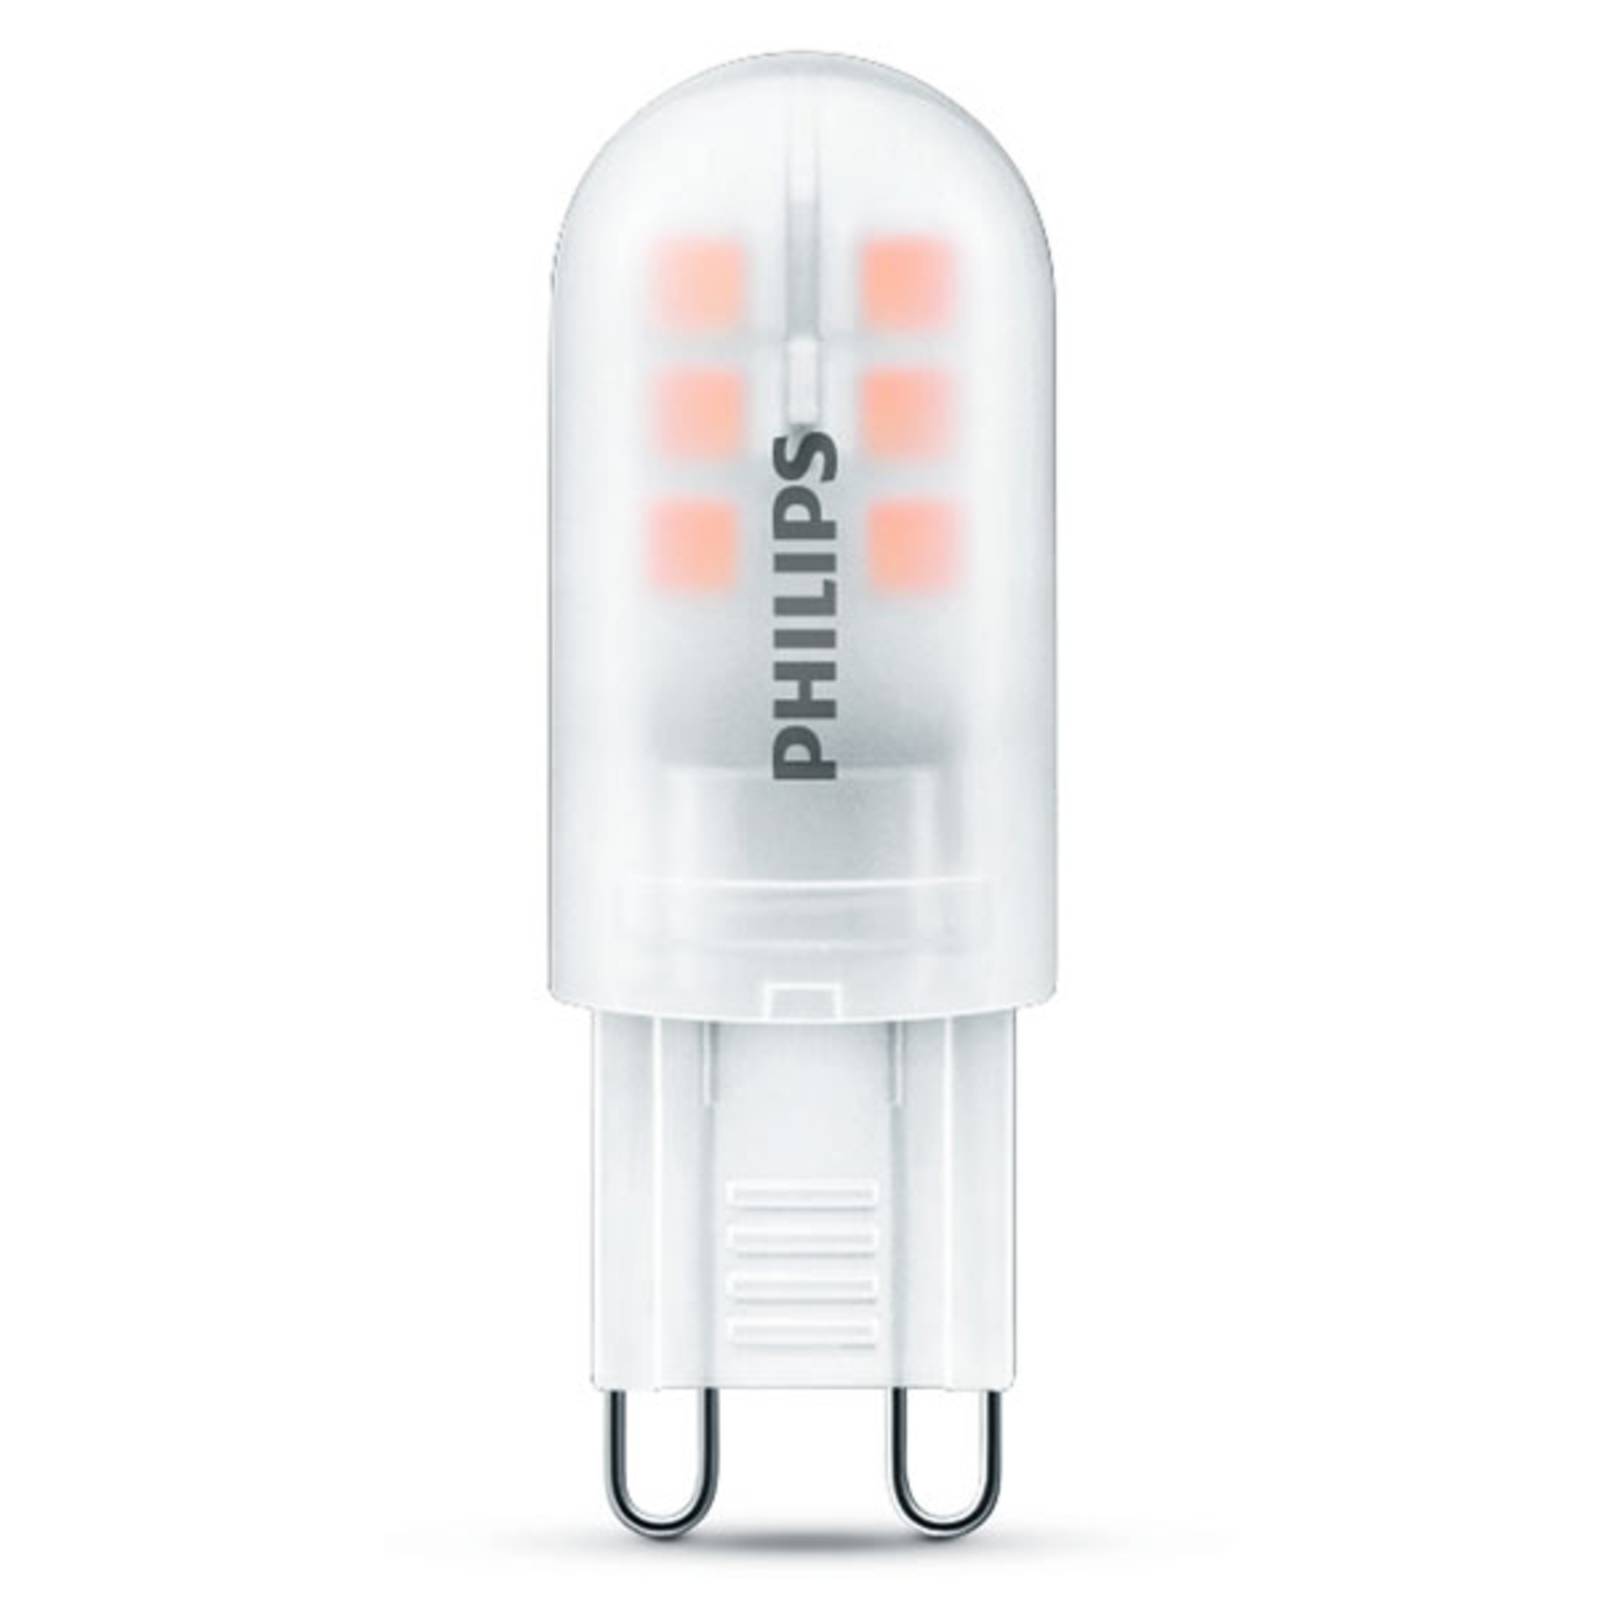 Image of Ampoule à broches LED G9 1,9 W blanc chaud 2 700 K 8718699758400